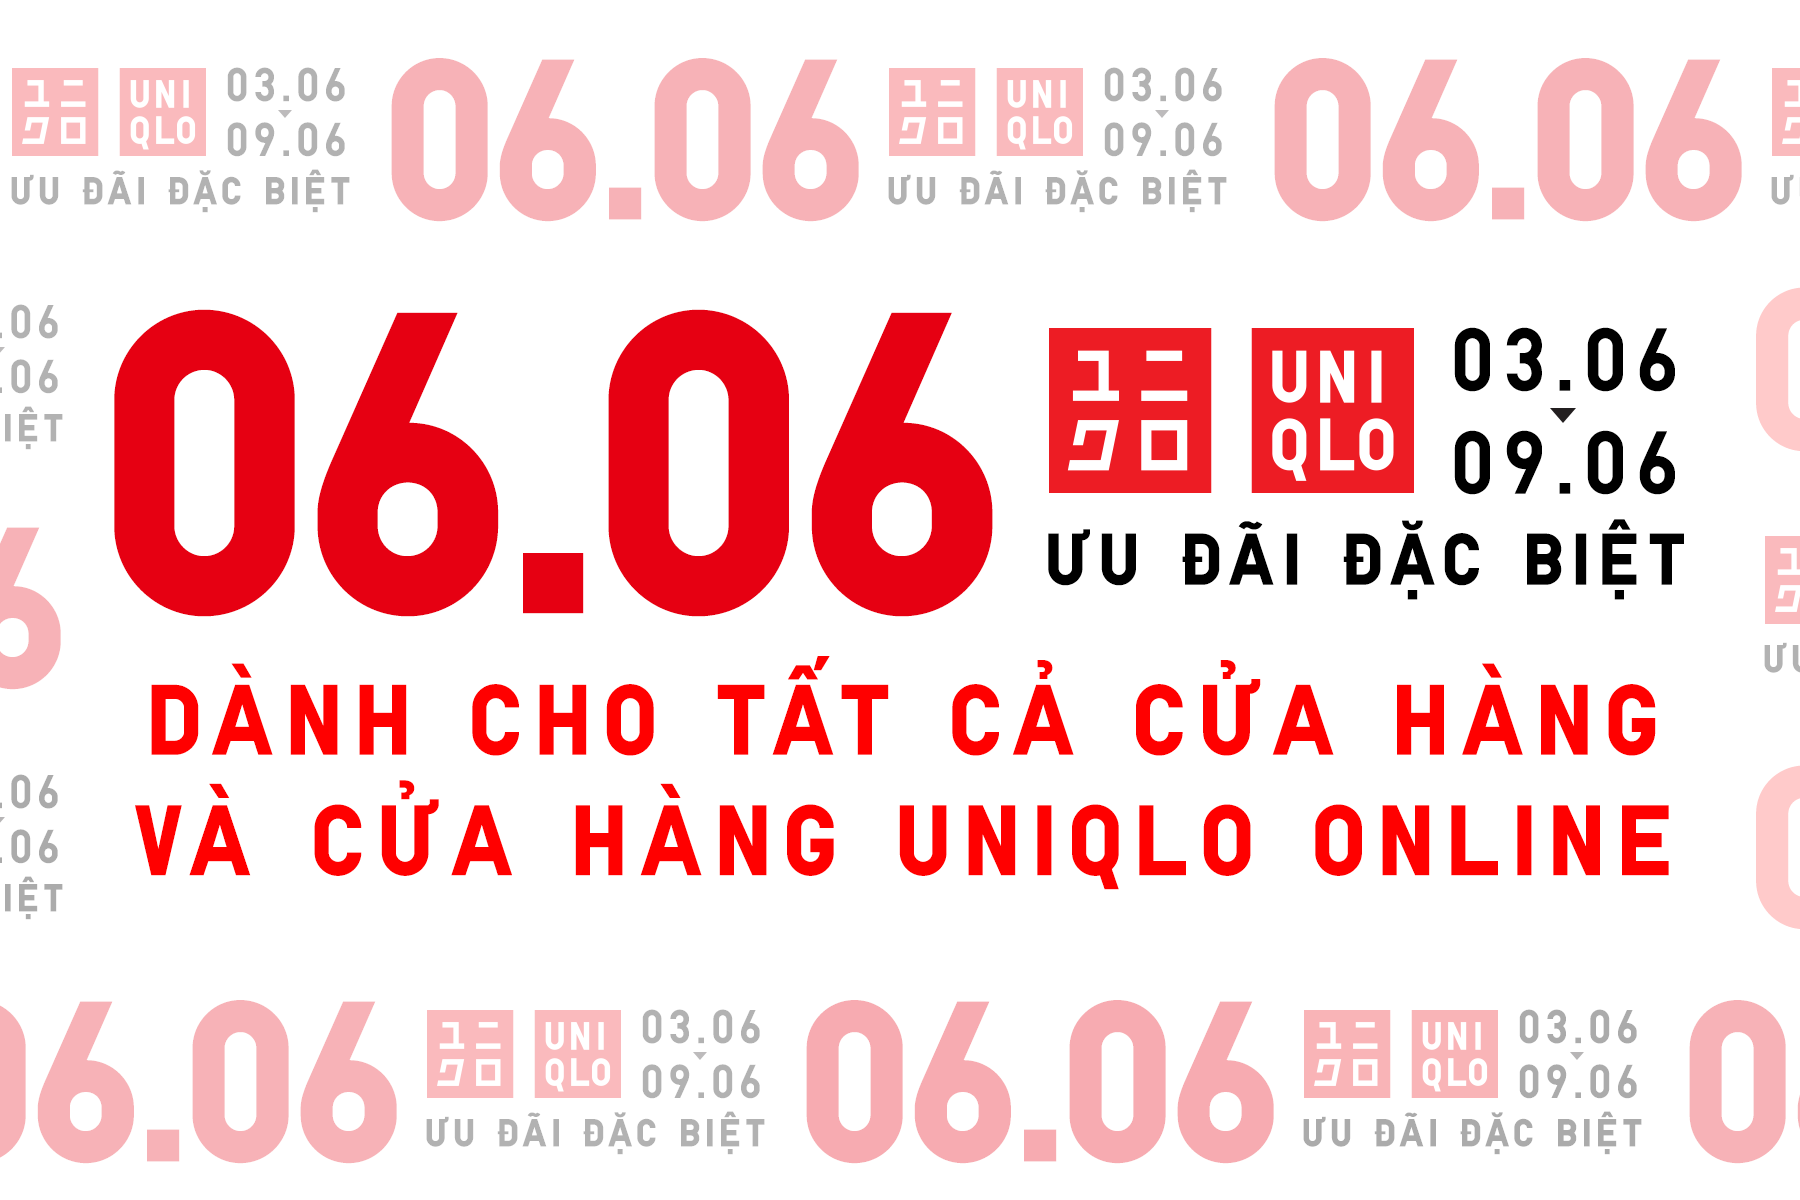 Uniqlo Usa Online Shop Now Available 1024 Wiw  Uniqlo Online Store Phone  PNG Image  Transparent PNG Free Download on SeekPNG